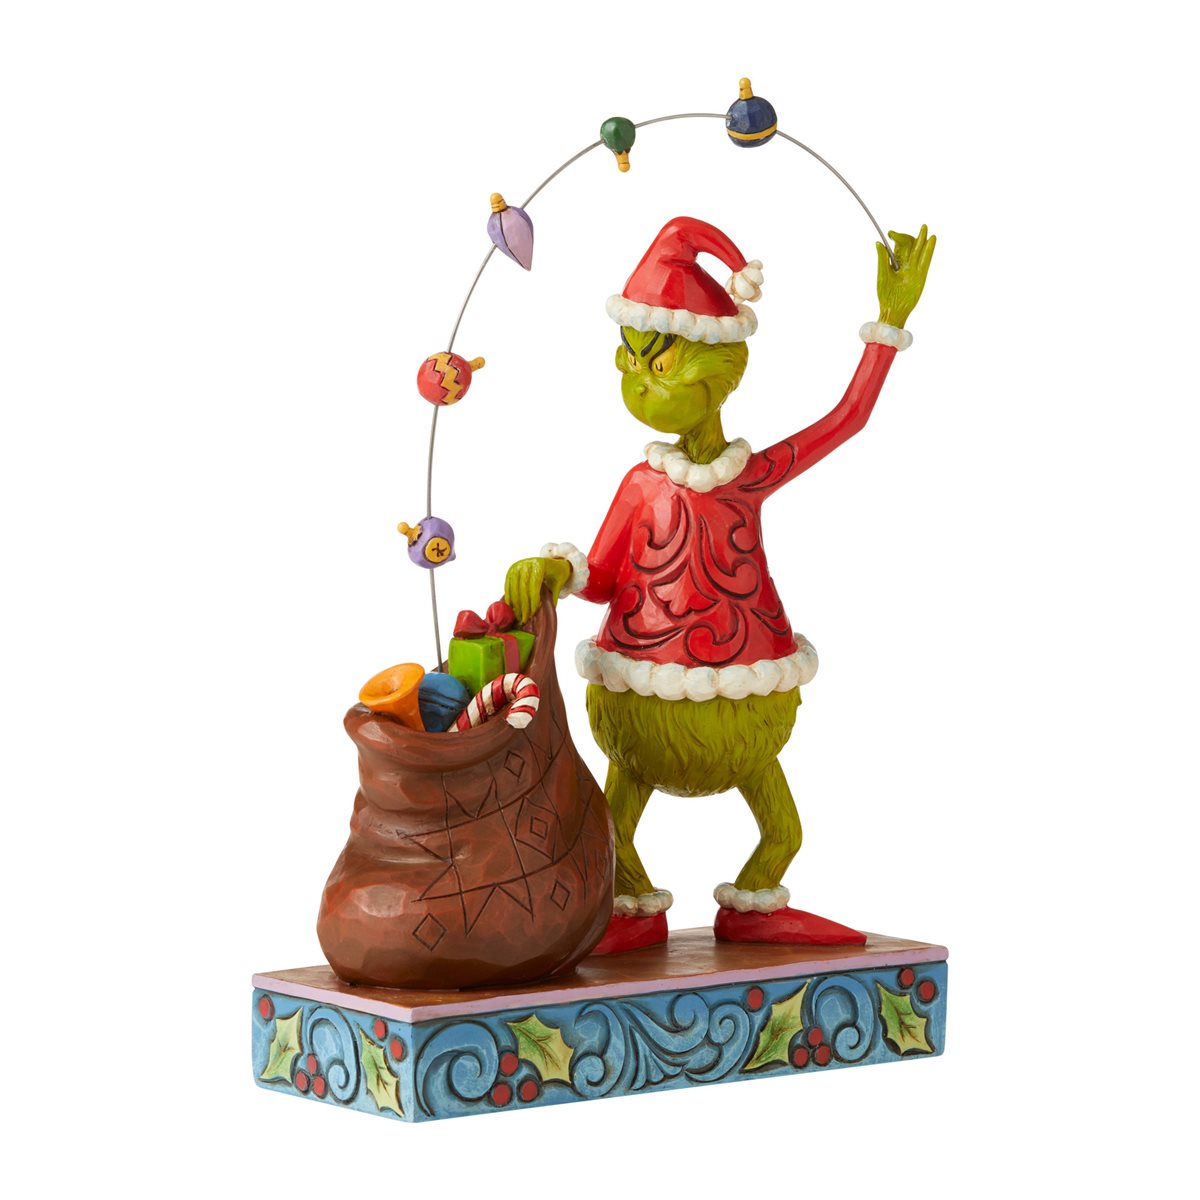 Dr. Seuss The Grinch Juggling Into Bag Statue by Jim Shore